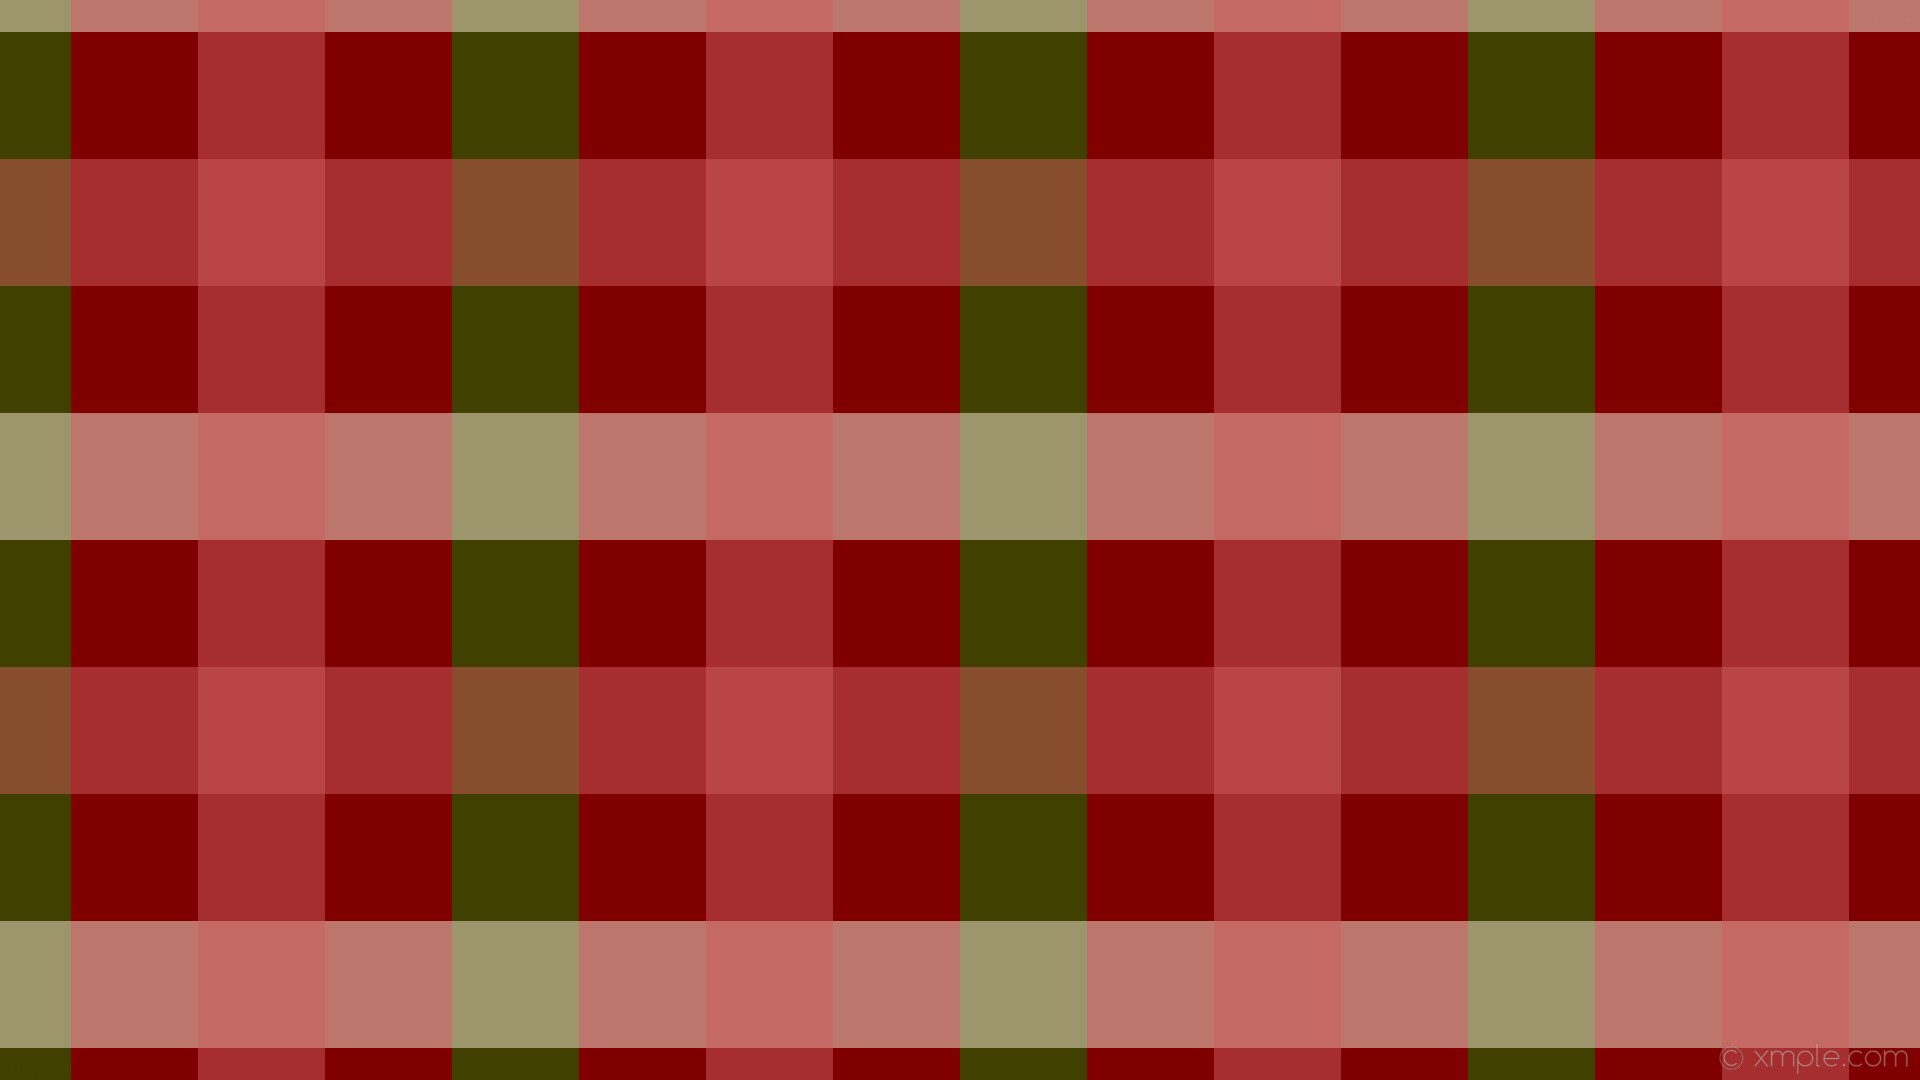 1920x1080 wallpaper brown red green white striped gingham quad maroon antique white  indian red #800000 #